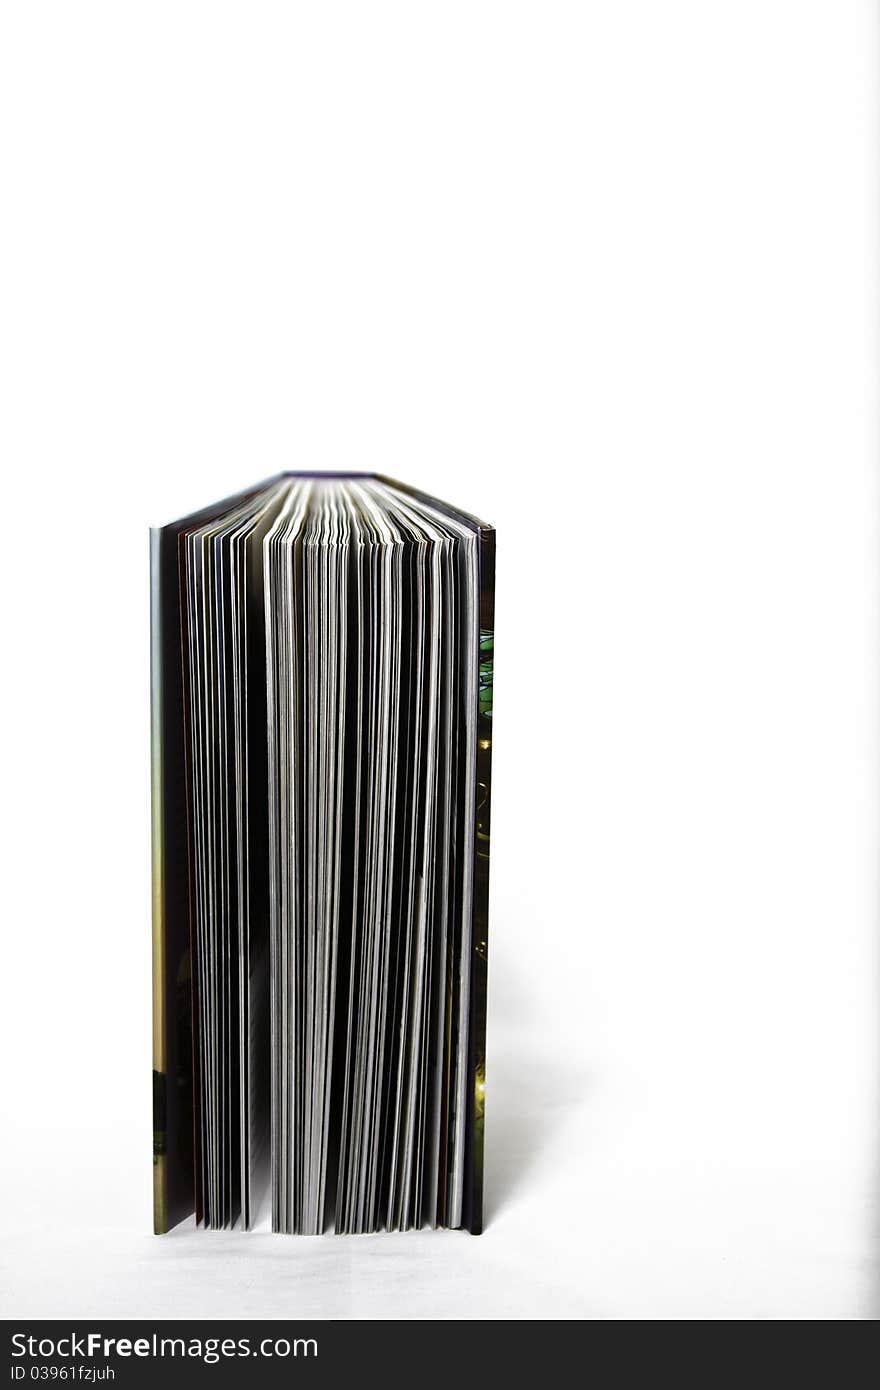 A standing open book isolated